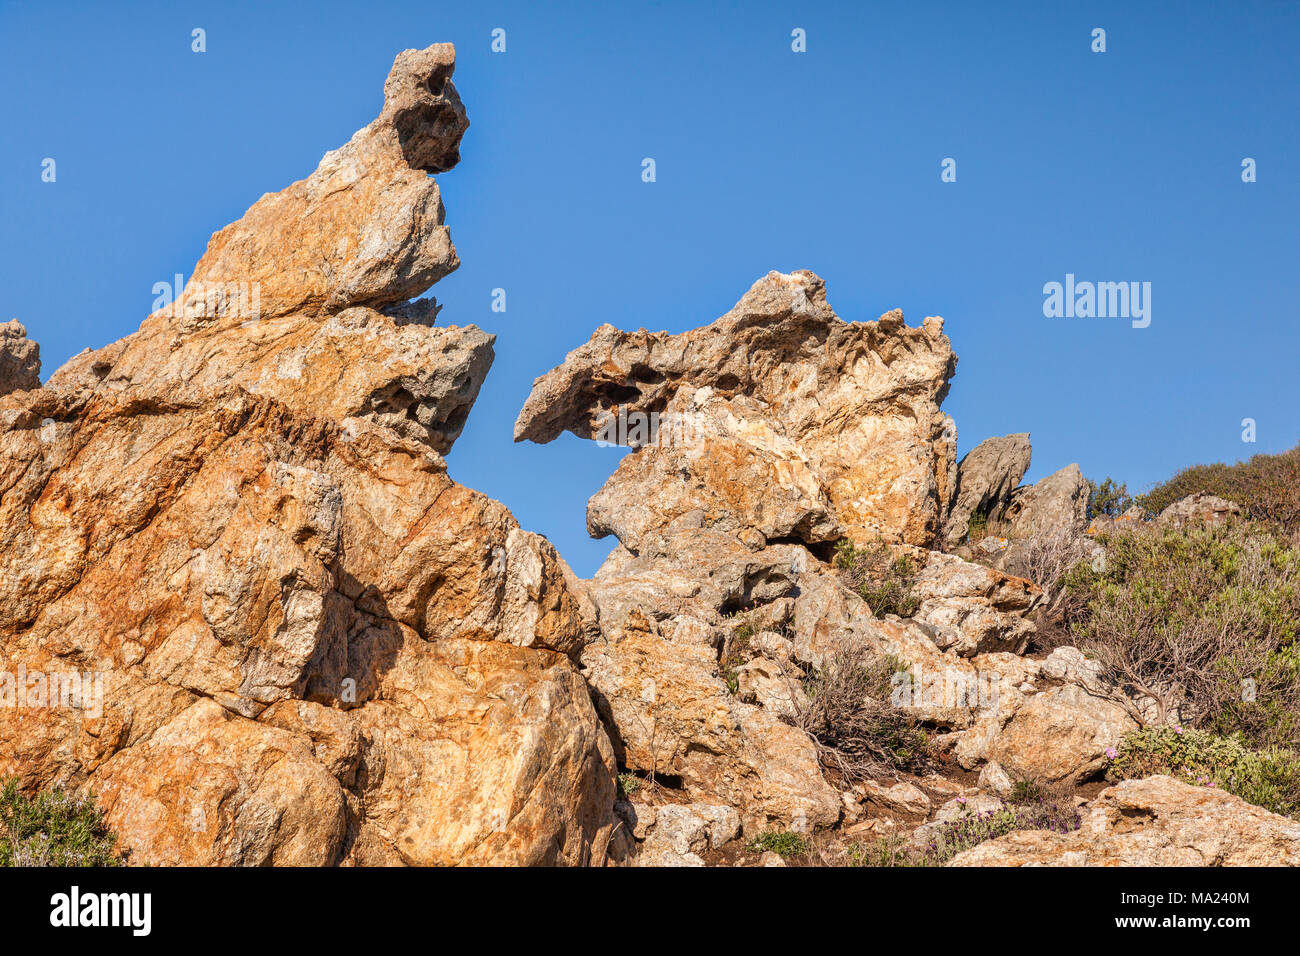 One of the rock formations which inspired the artist Salvador Dali, Cap de Creus, Catalonia, Spain Stock Photo